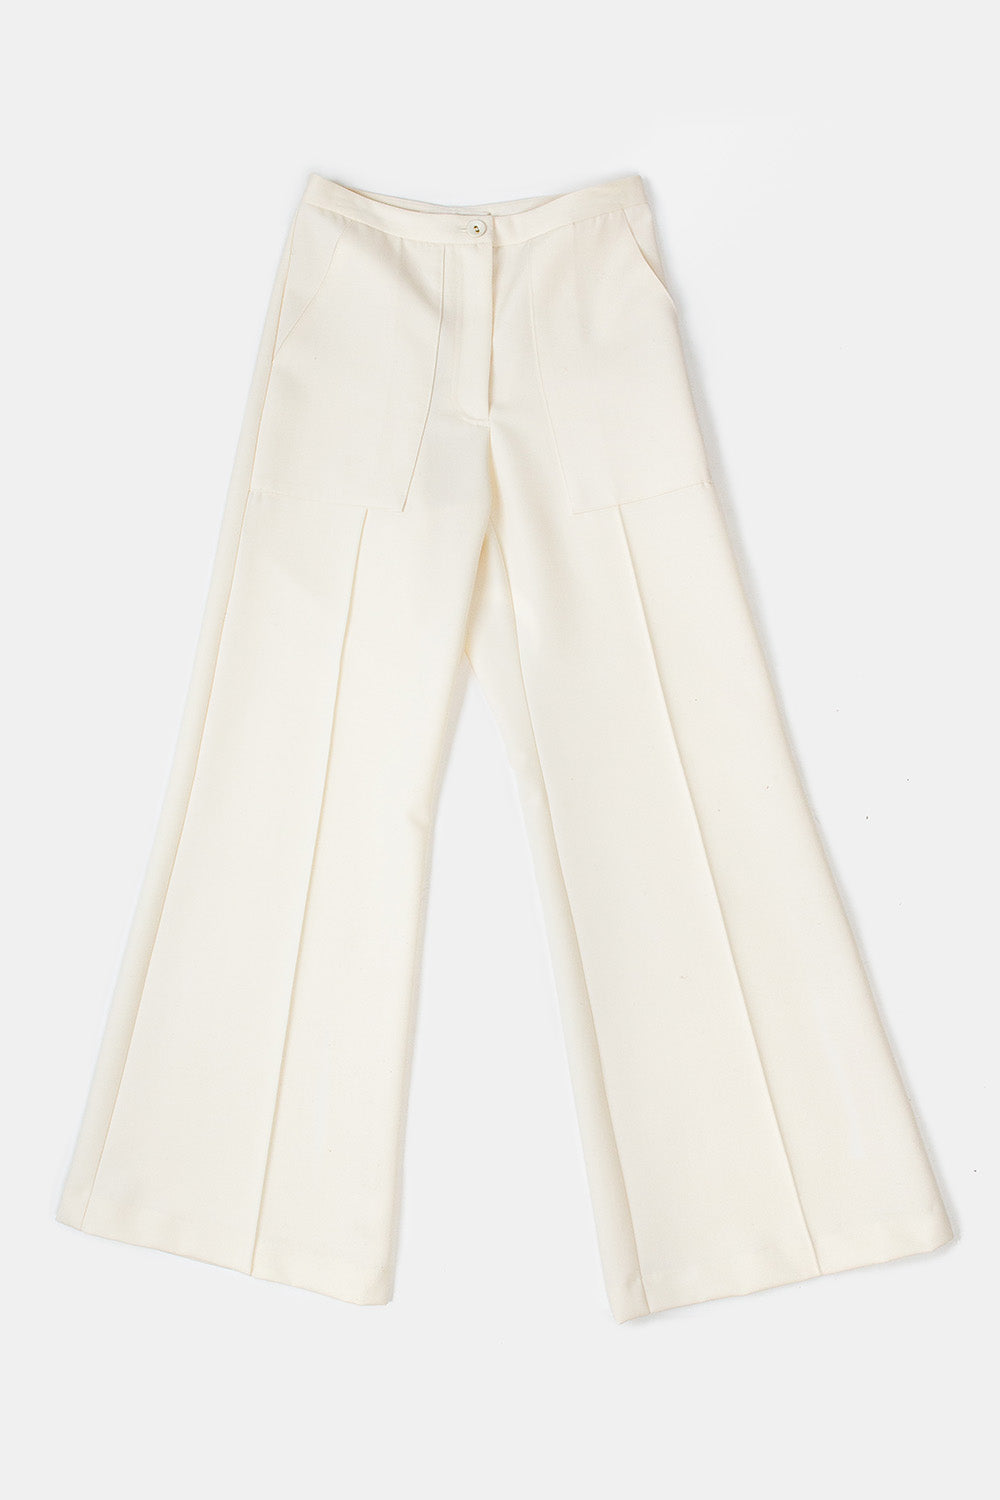 Darby Pant in Winter White